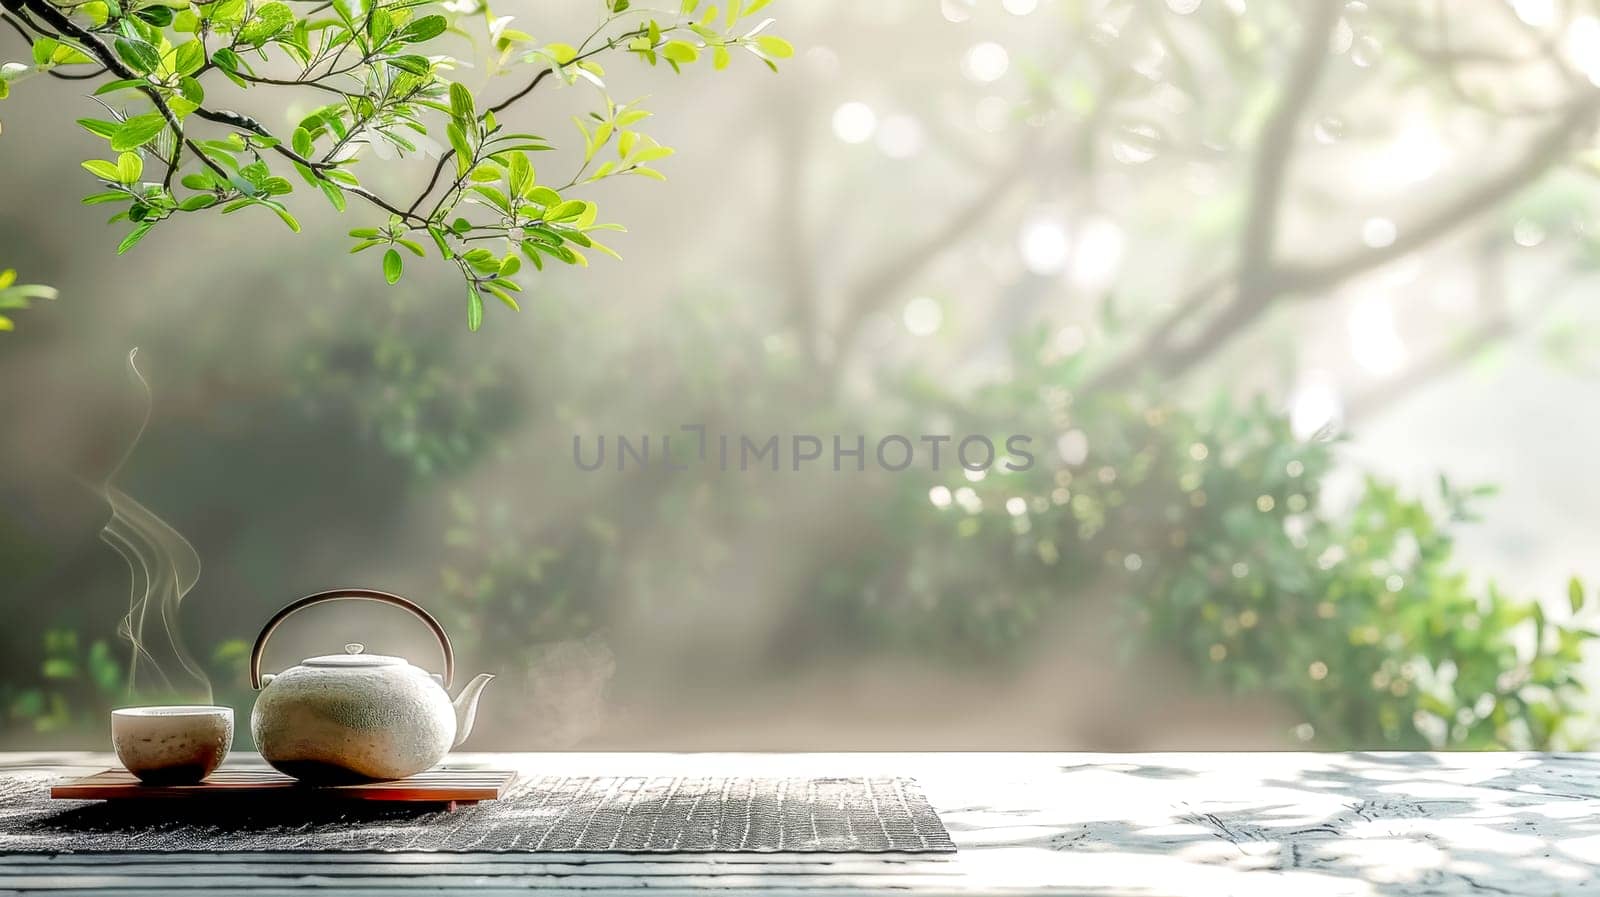 Serene setting with a steaming teapot and cup amidst lush foliage and soft sunlight